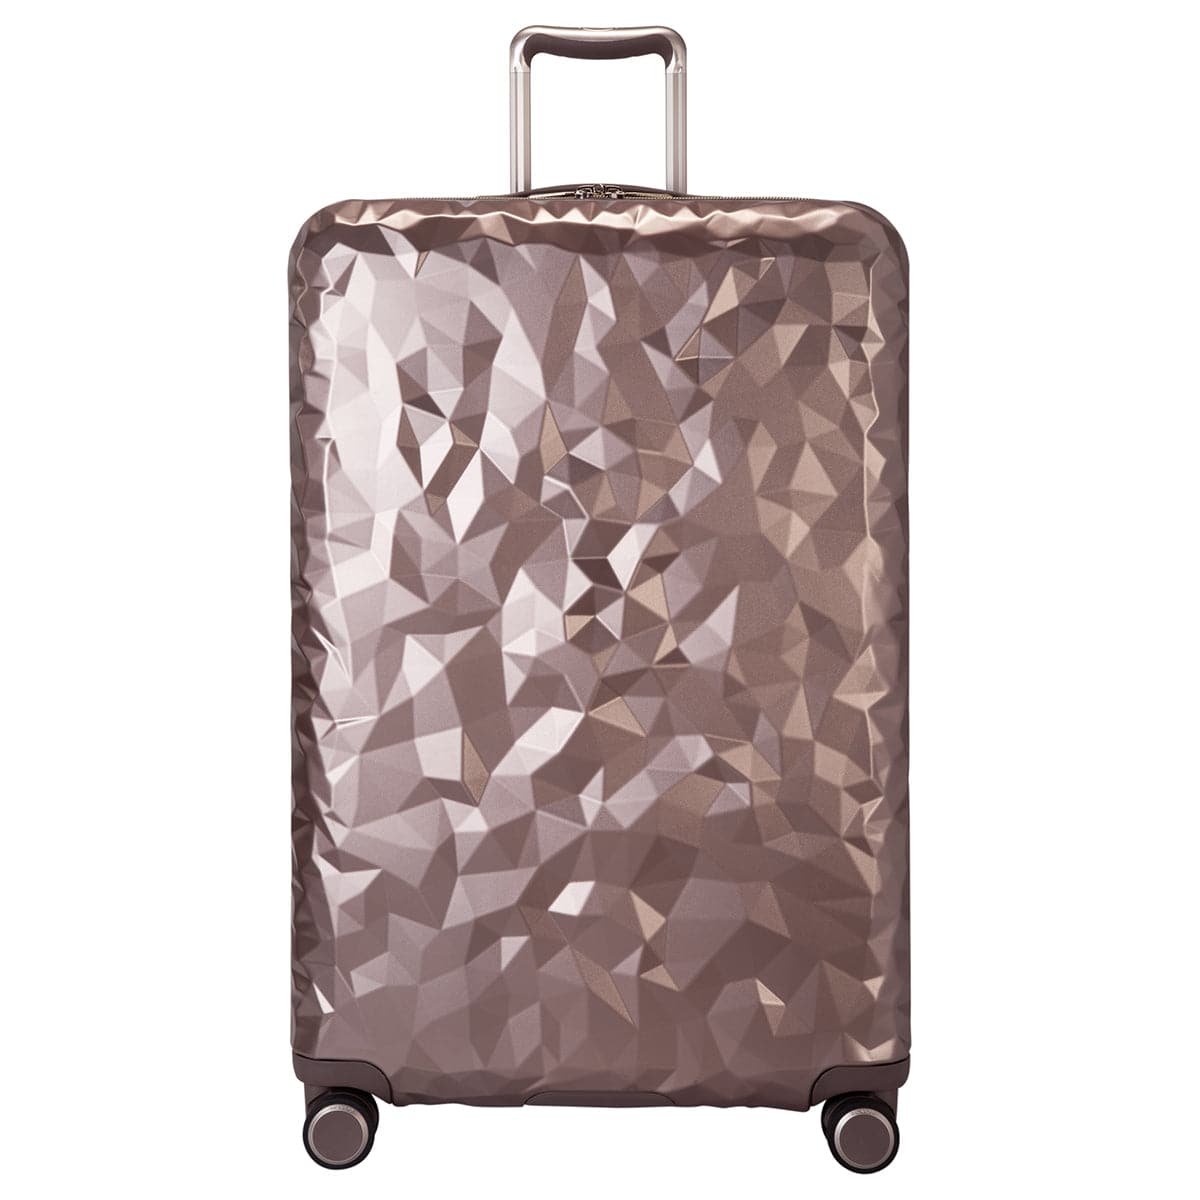 Ricardo Beverly Hills Indio Large Check-In Suitcase Luggage